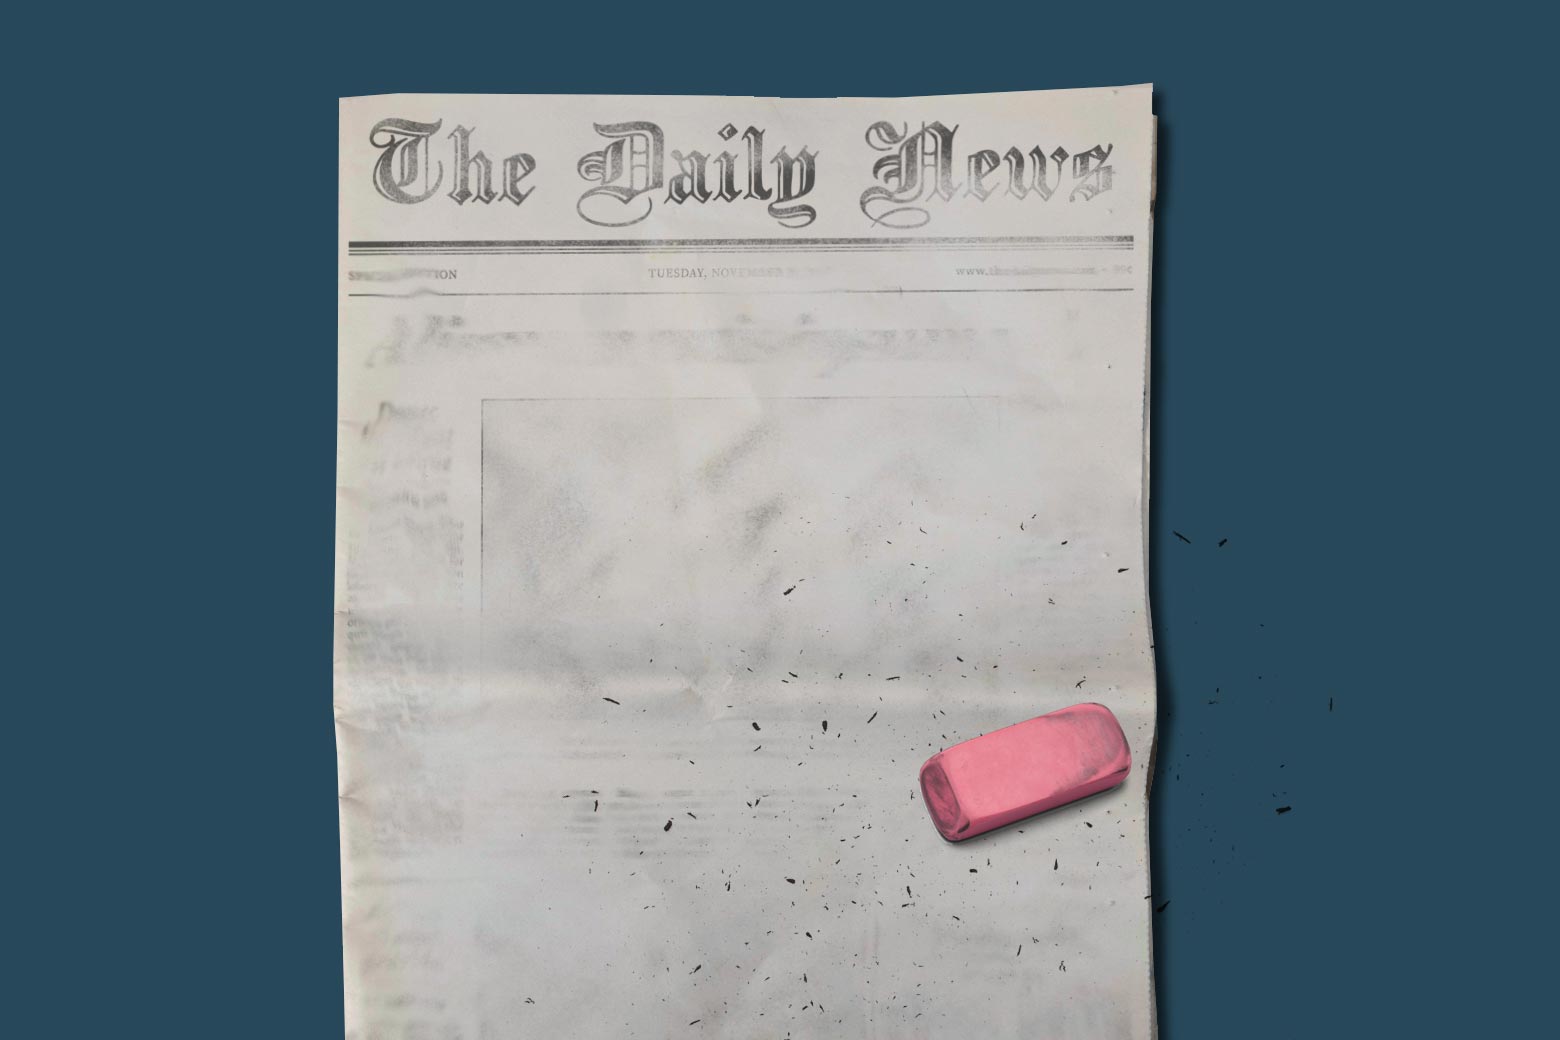 A front page of a newspaper that has been erased with a large pink erasure.